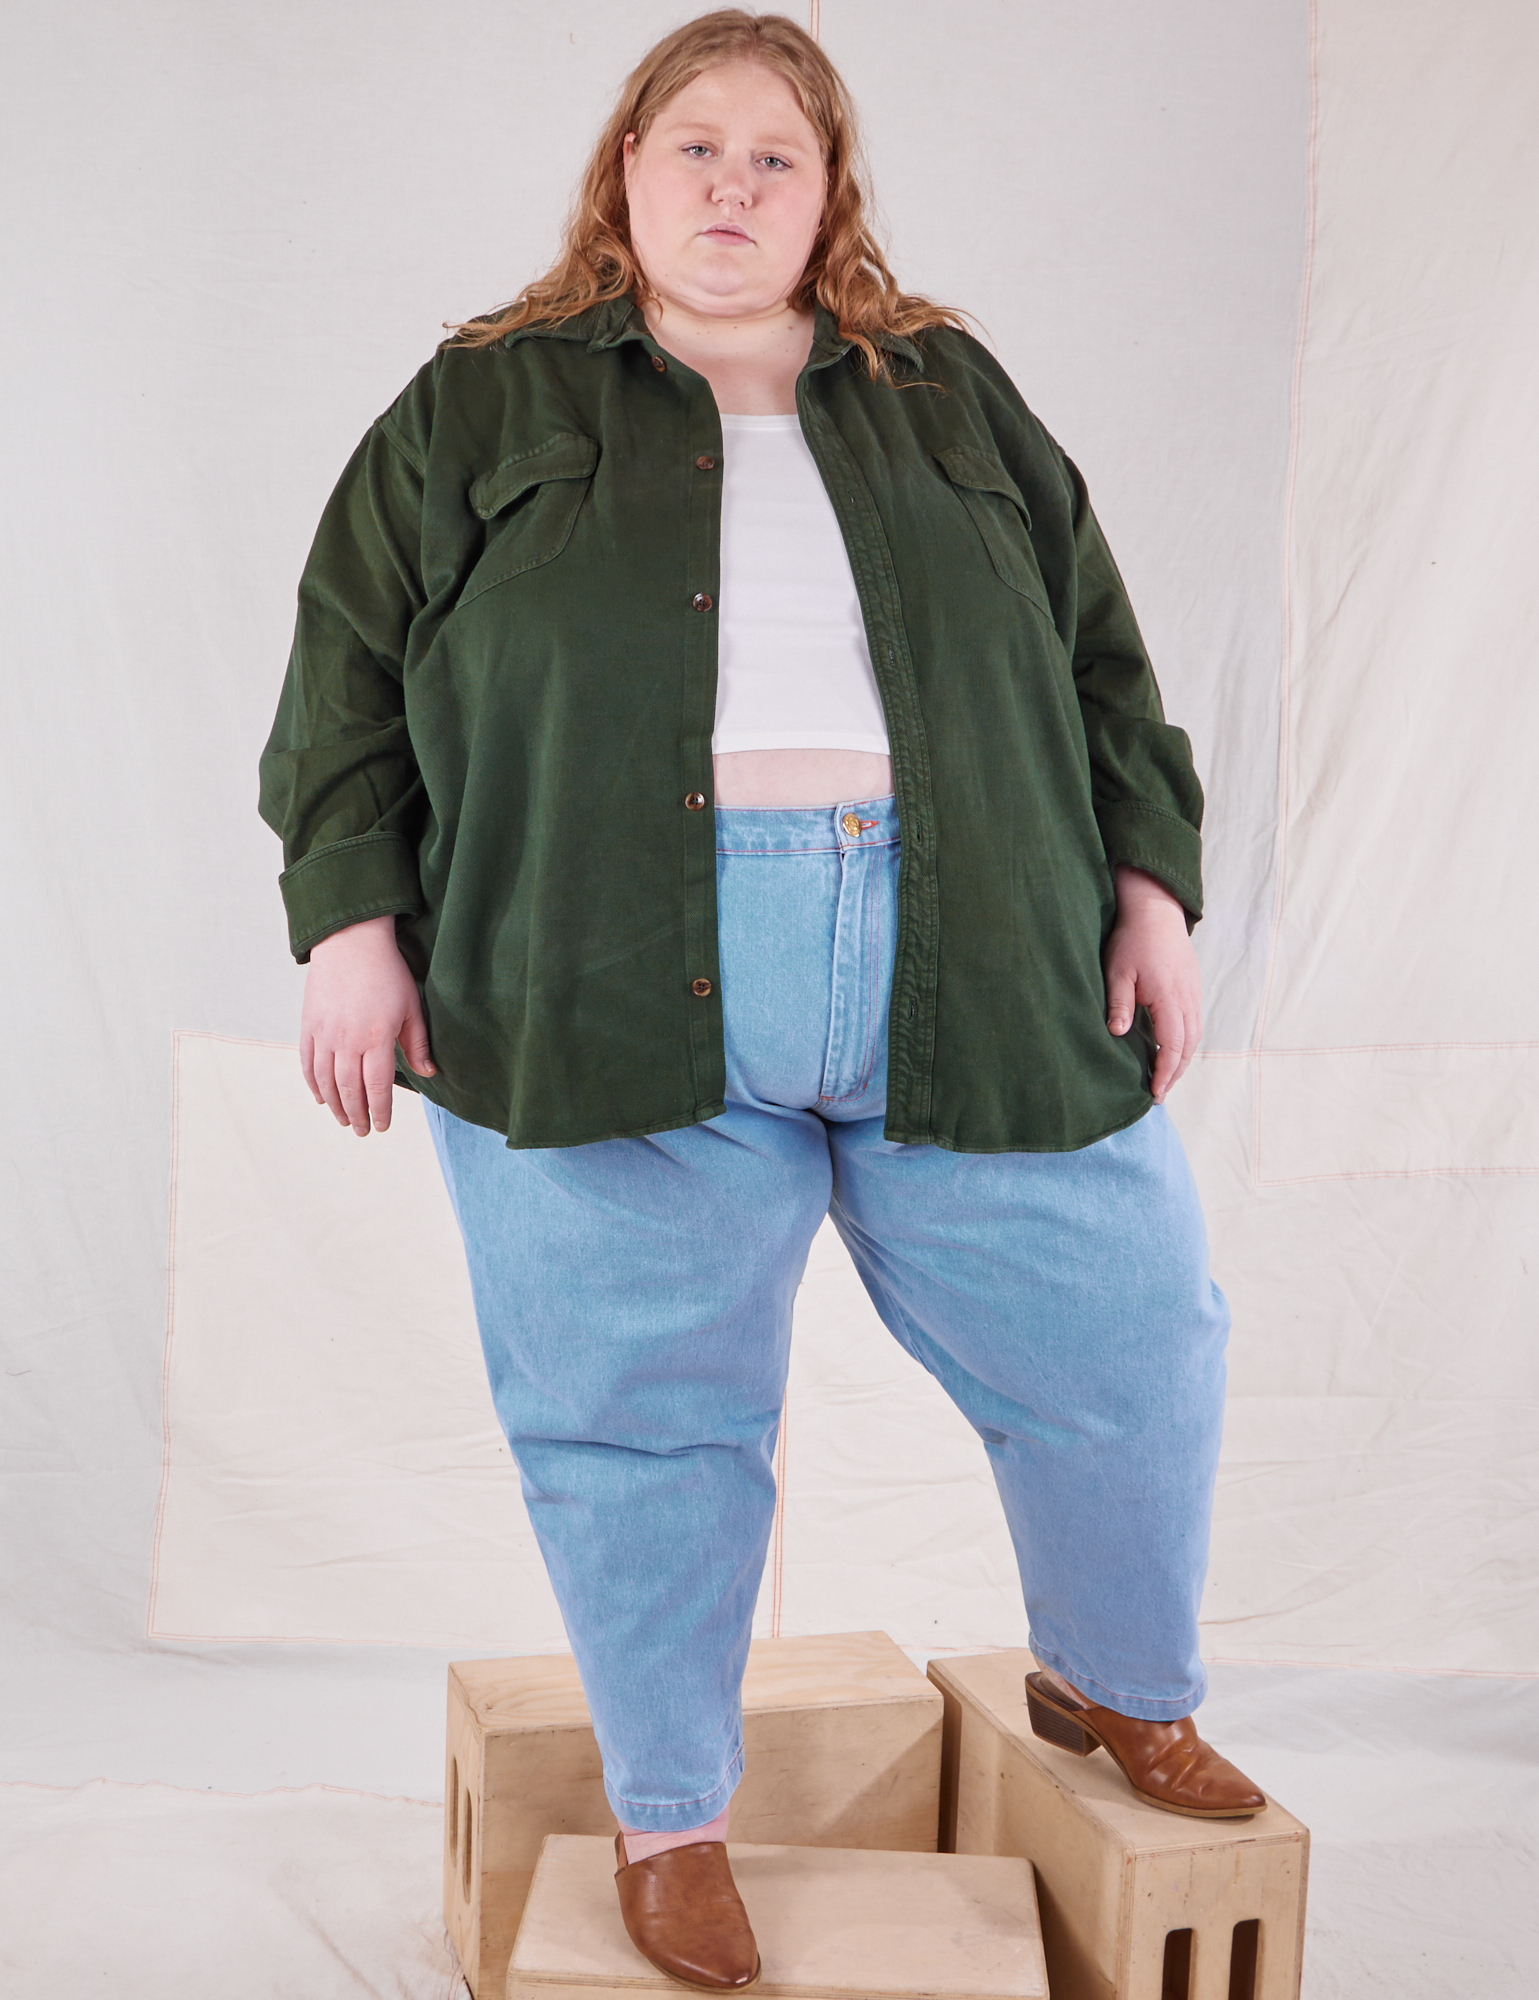 Catie is wearing Flannel Overshirt in Swamp Green, vintage off-white Cropped Tank Top and light wash Trouser Jeans